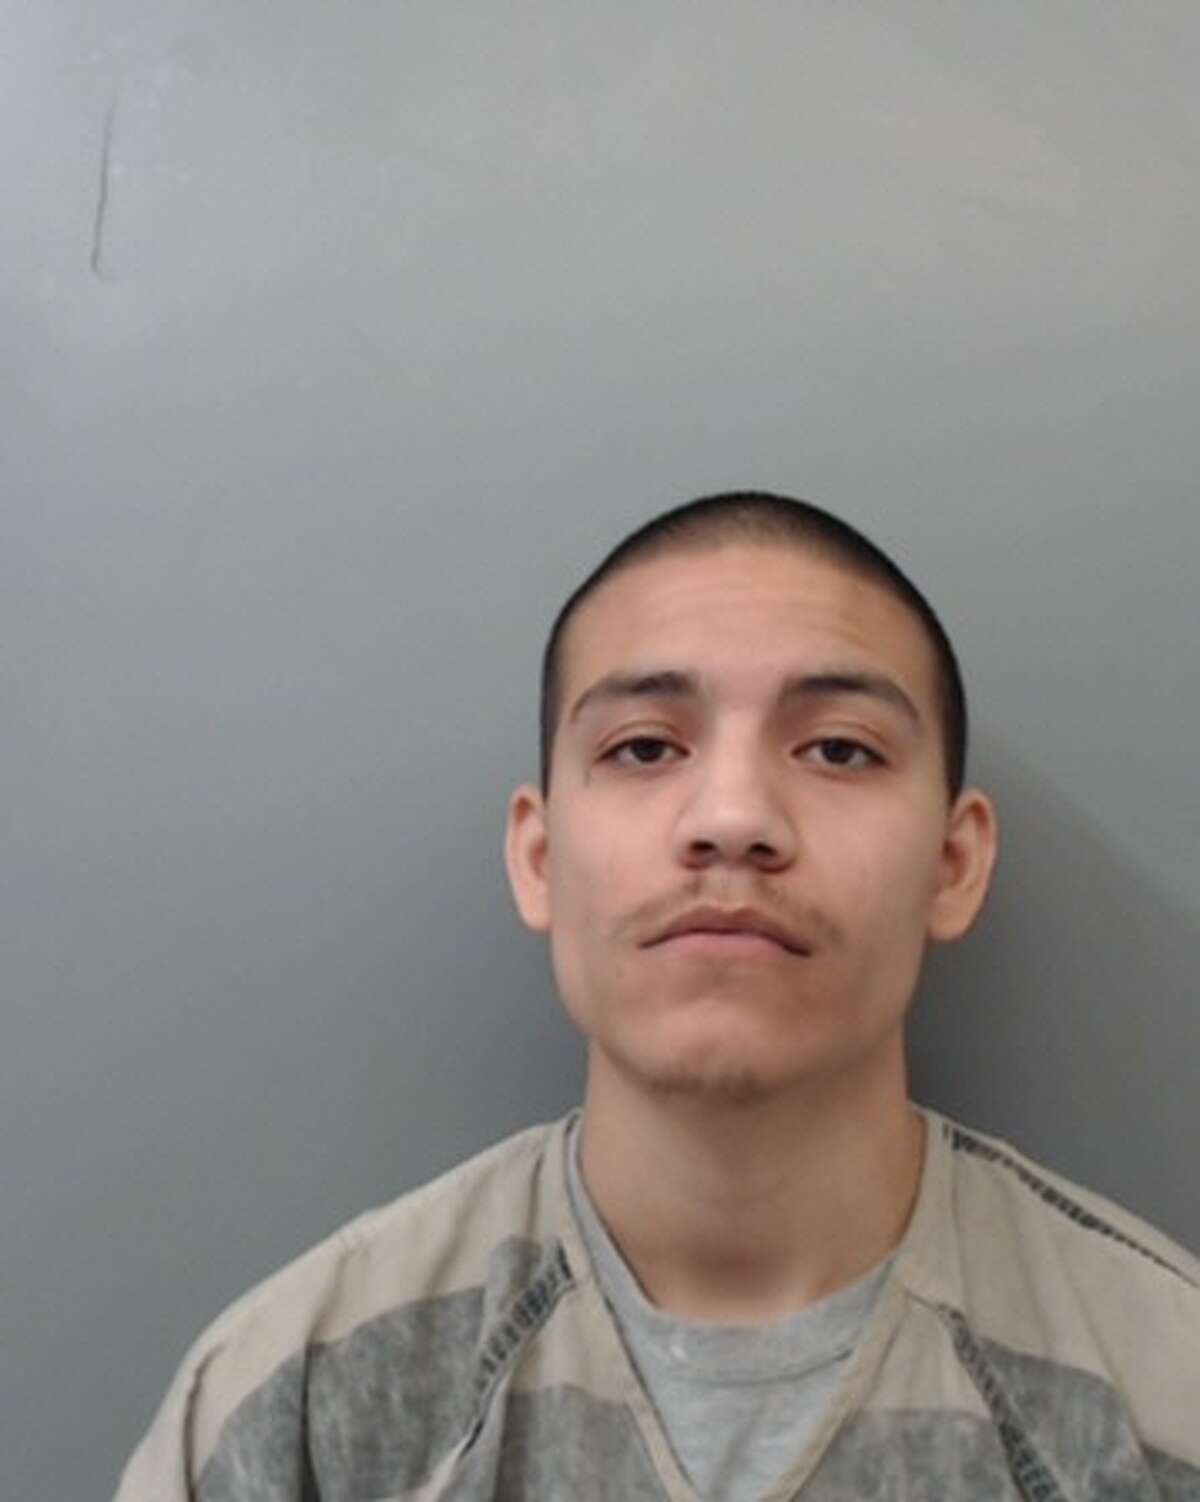 Alberto Martinez, 25, was arrested and charged with assault, family violence.